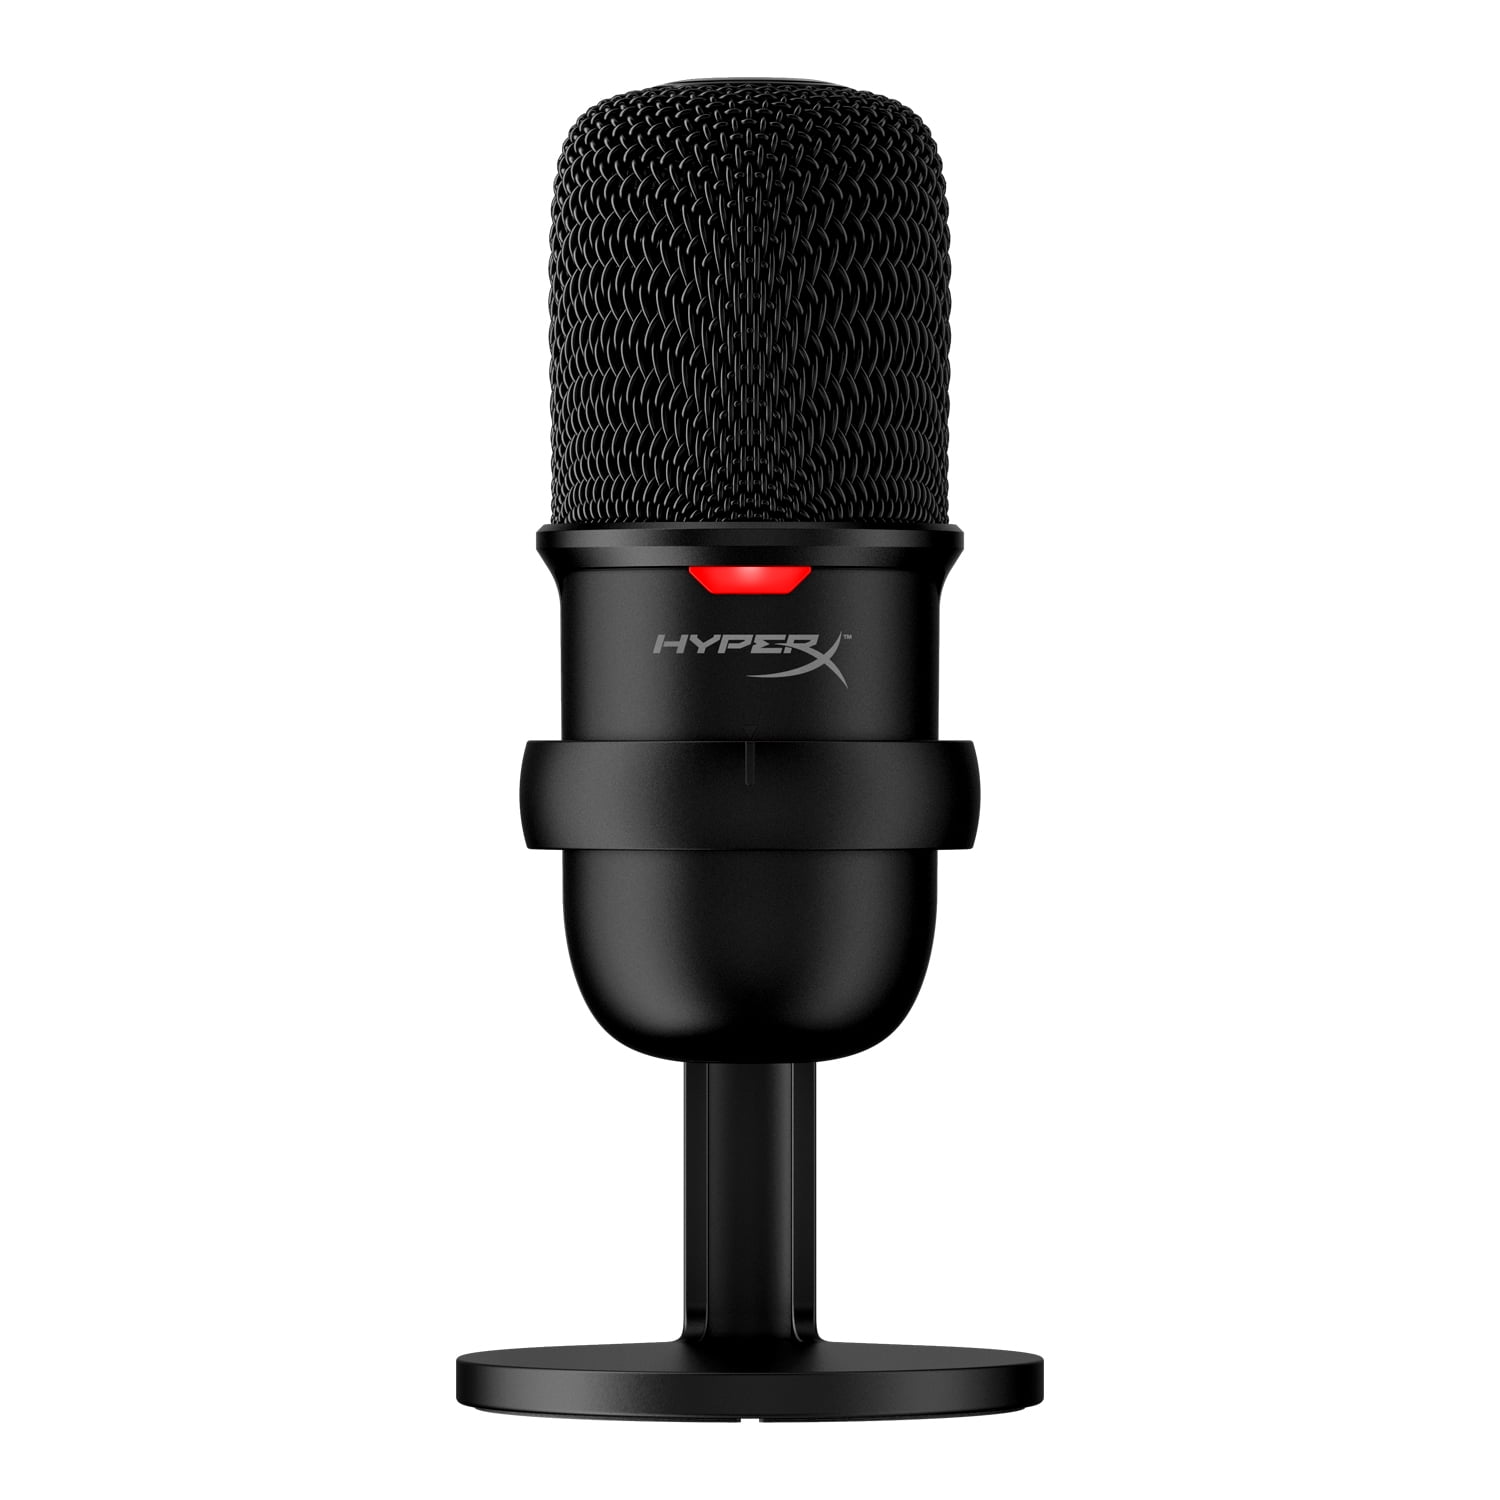 HyperX QuadCast – USB Condenser Gaming Microphone, for PC, PS4 and Mac,  Anti-Vibration Shock Mount, Four Polar Patterns, Pop Filter, Gain Control,  Podcasts, Twitch, , Discord, Red 